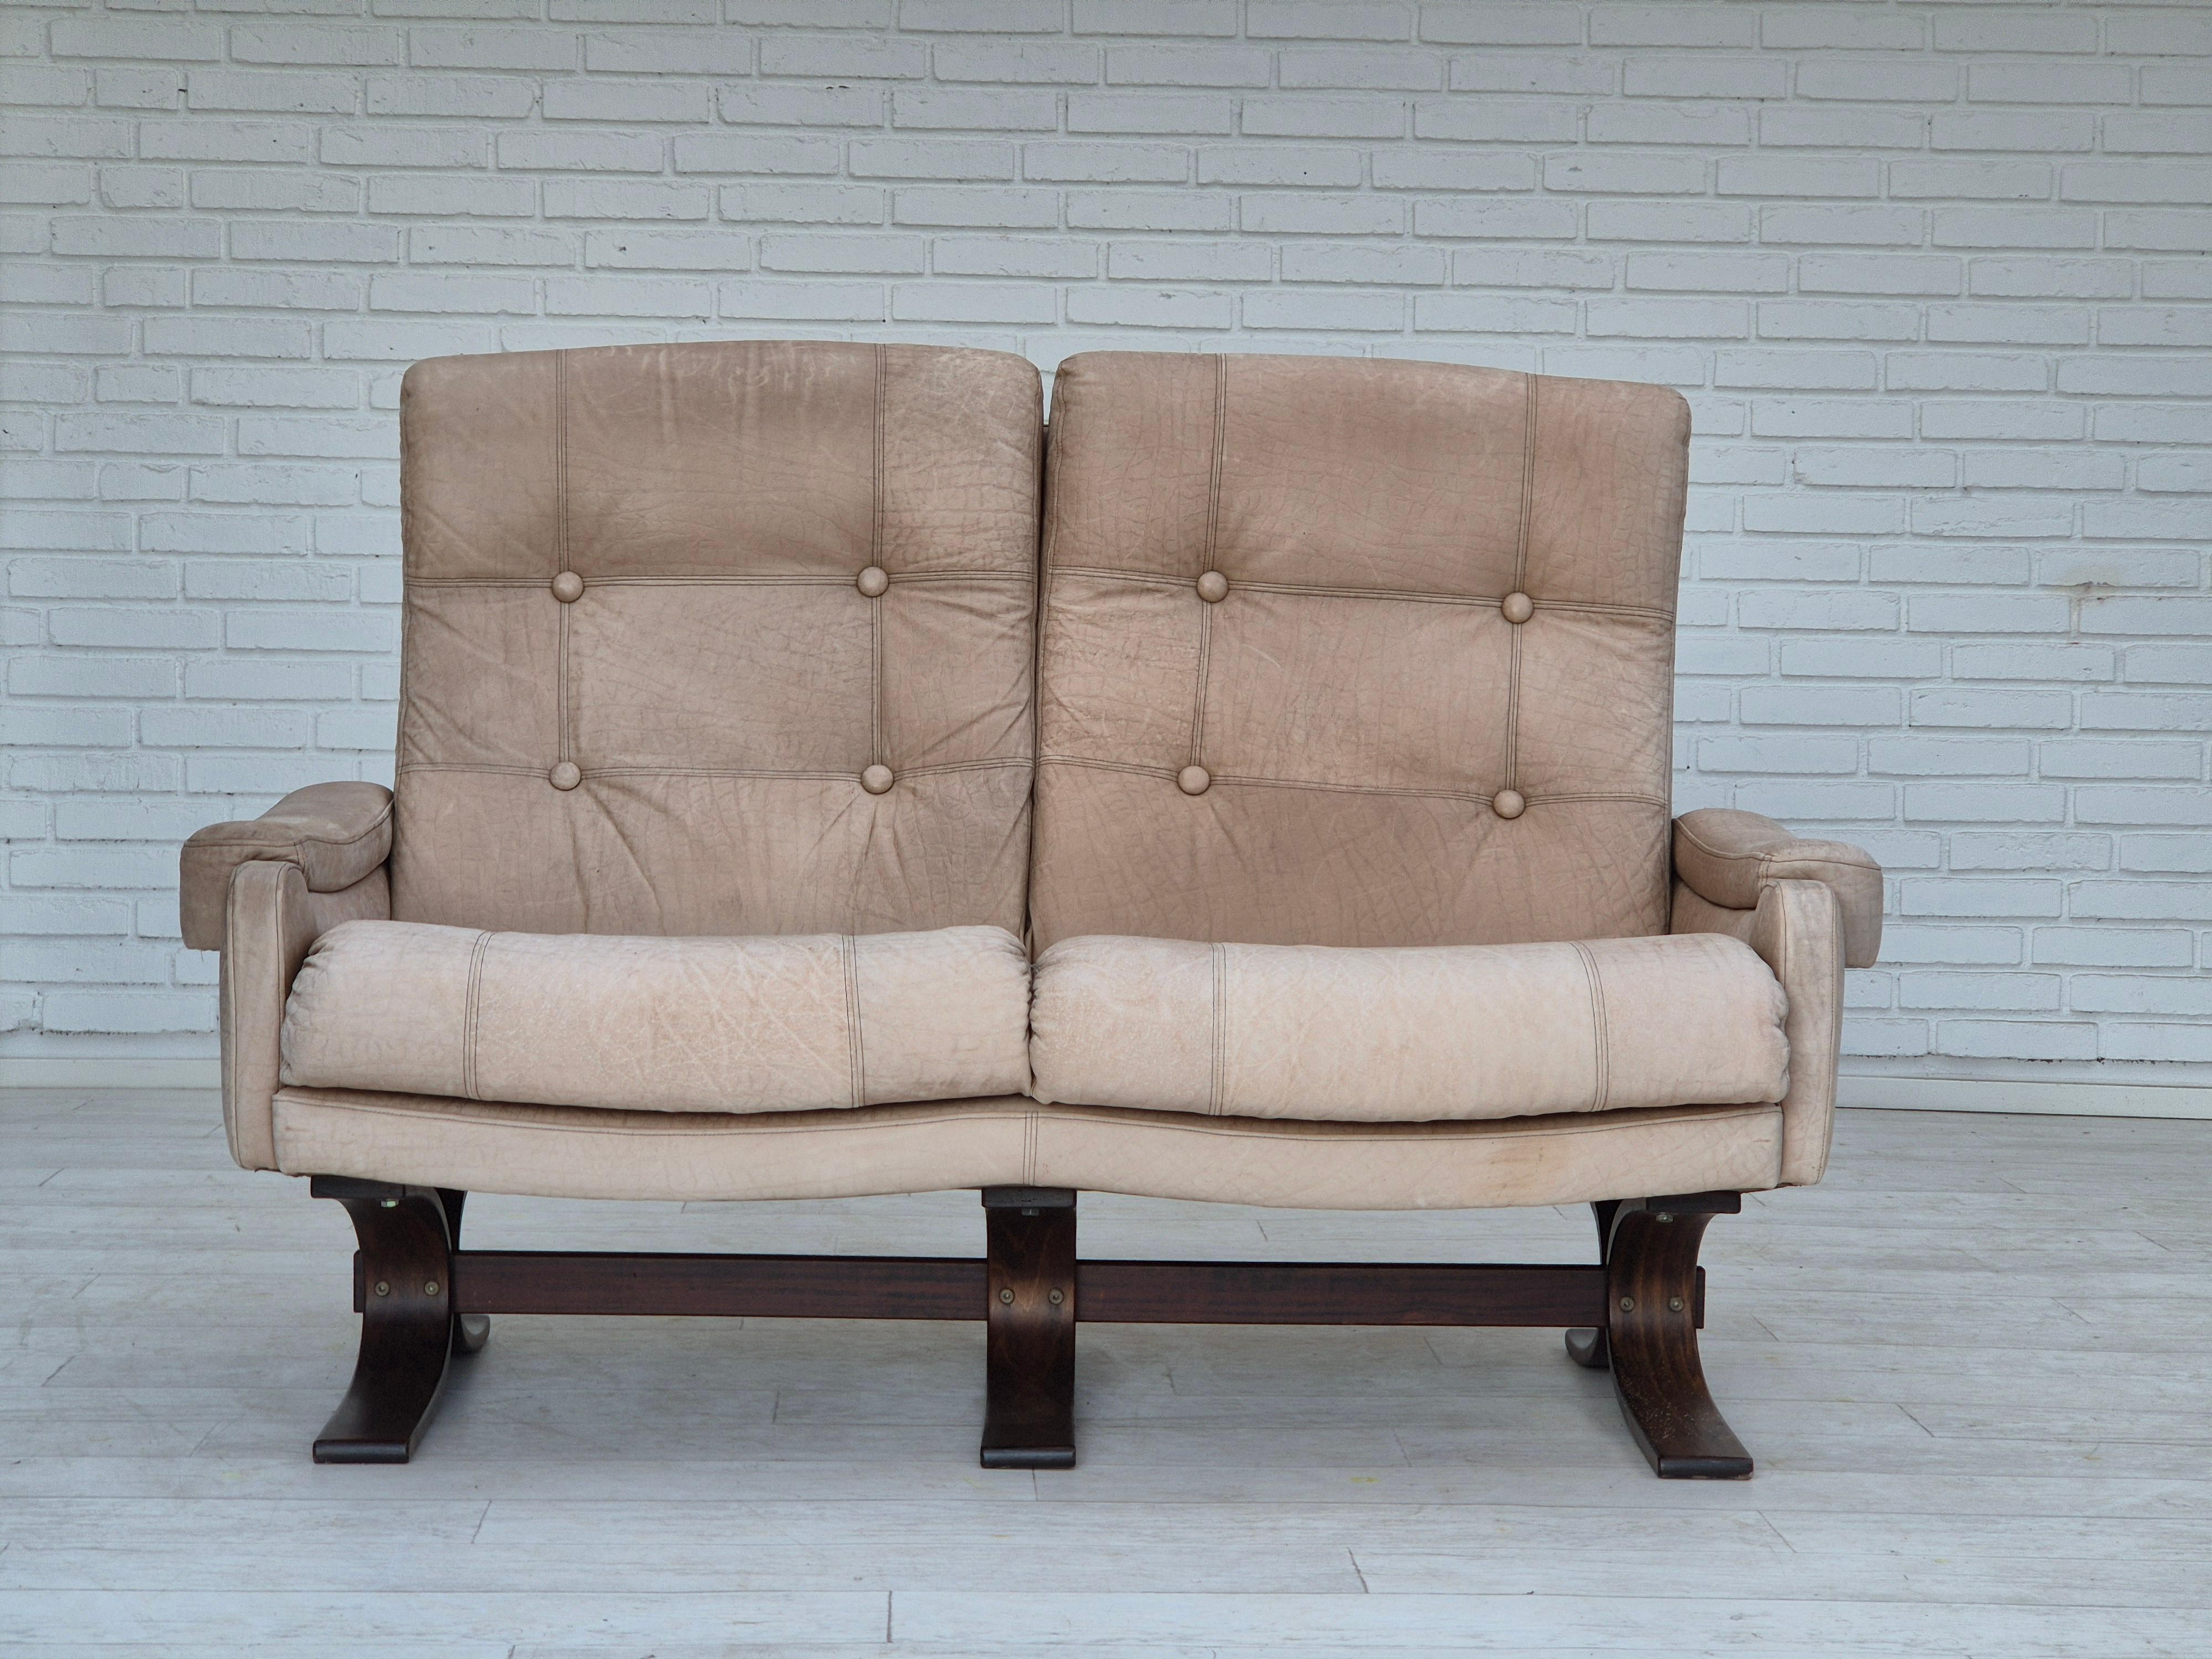 1970s, Scandinavian 2 seater sofa in original very good condition: no smells and no stains. Light brown/creamy leather with nice patina. Bent wood legs in beech. Manufactured by Danish or Swedish furniture manufacturer.